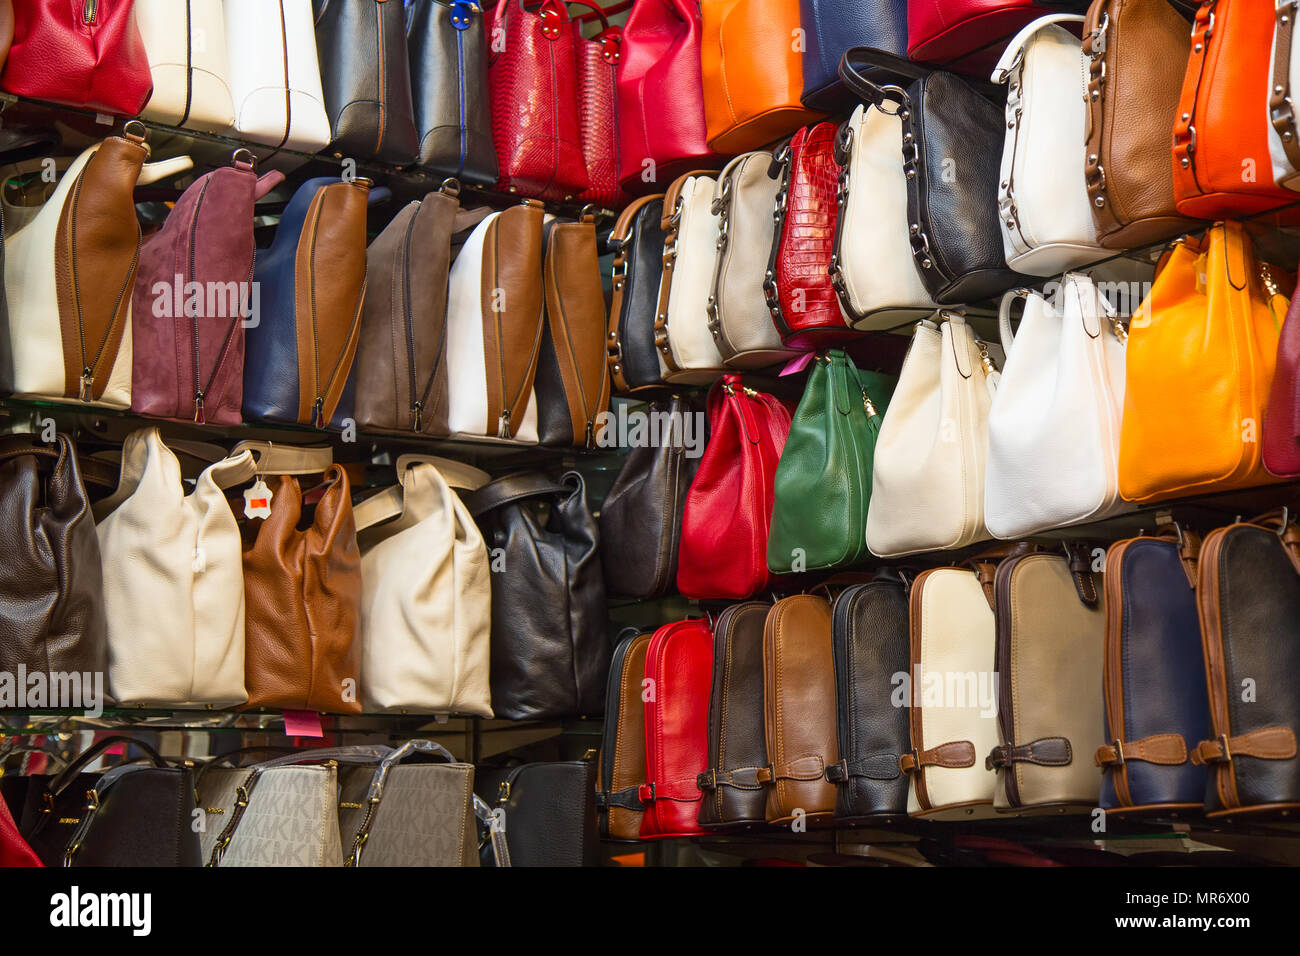 ISTANBUL - MAY 3: Faked bags on sale on the narrow street around Grand Bazaar on Mal 3, 2015 in Istanbul, Turkey. Area around Grand Bazaar is well kno Stock Photo